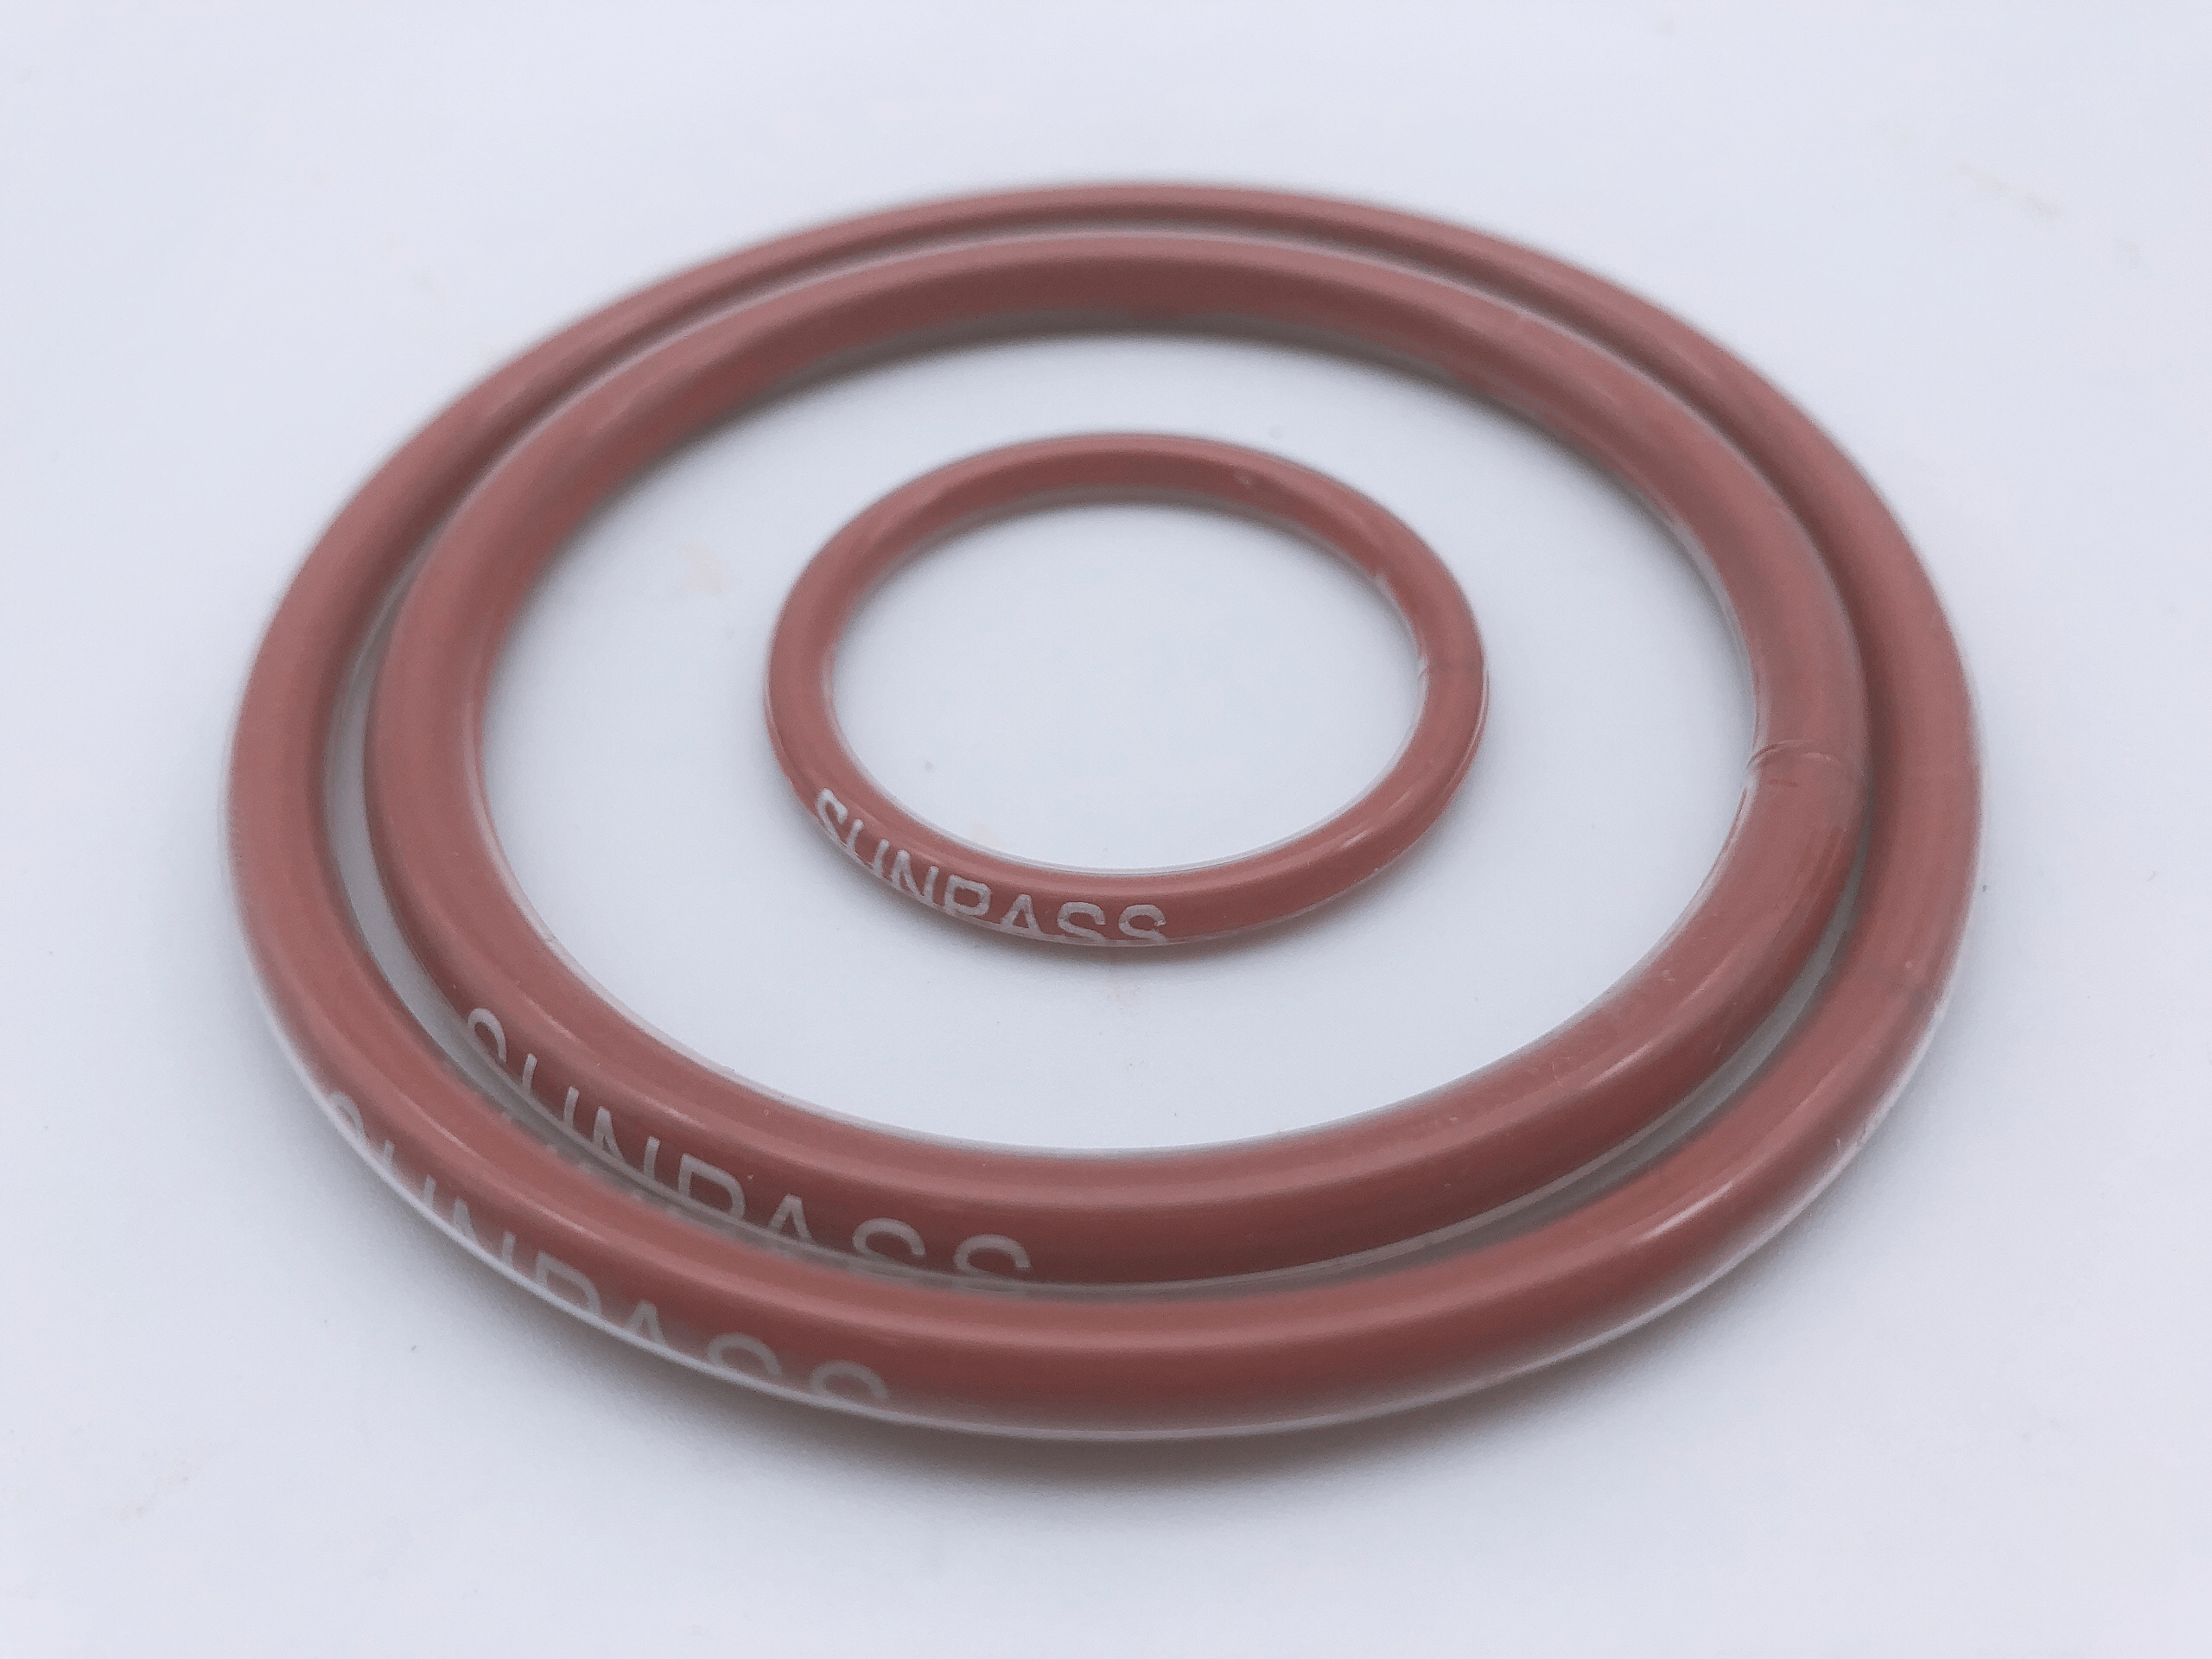 The India Customer Ordered 6000KGS O-ring products from TOP-SEALING.